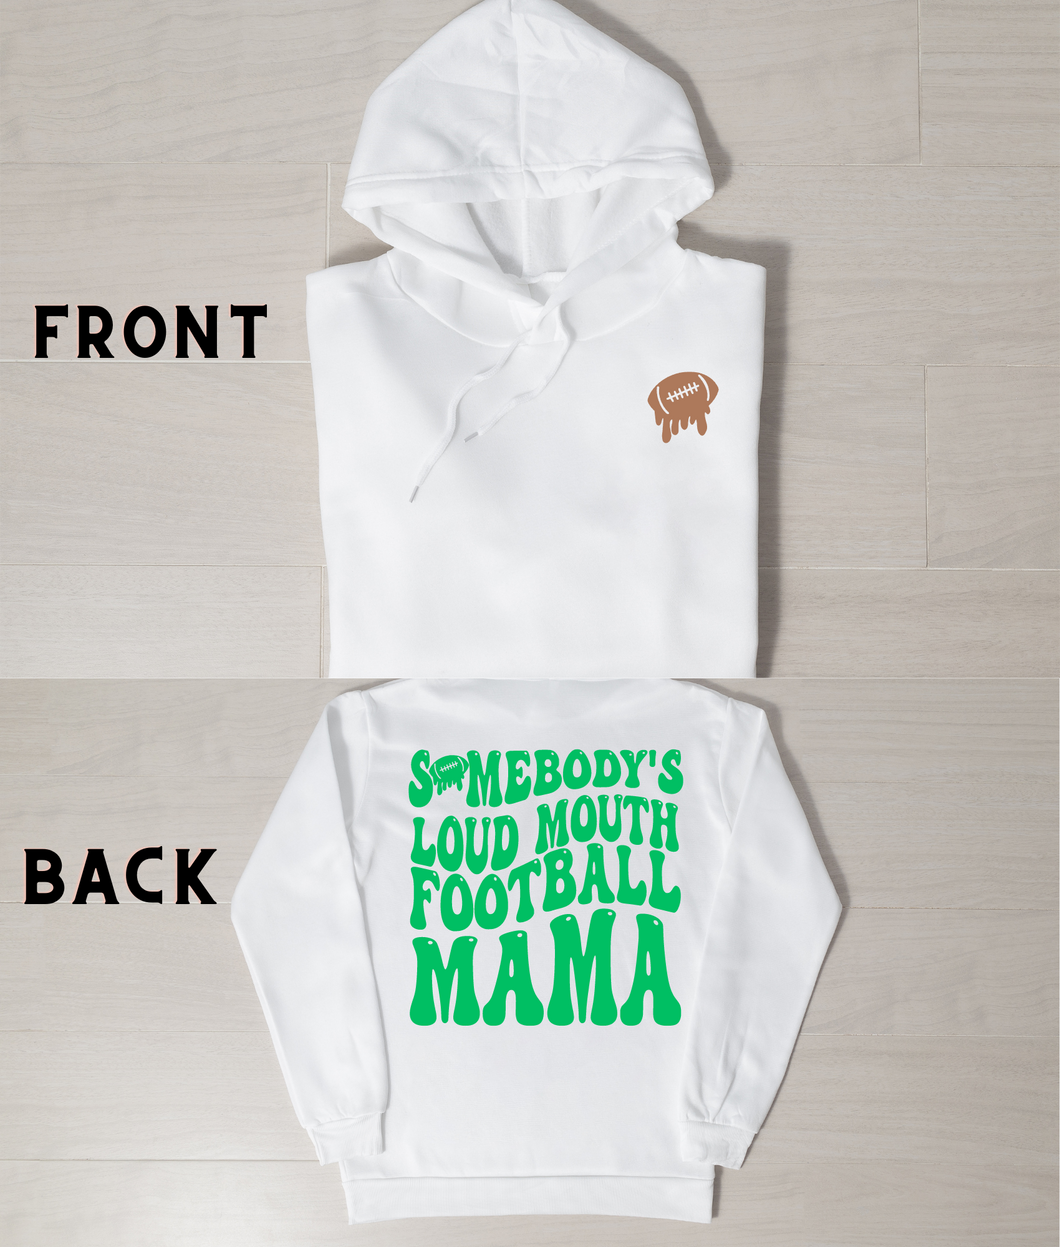 Somebody Loud Mouth Football Mama (Front and Back Design)